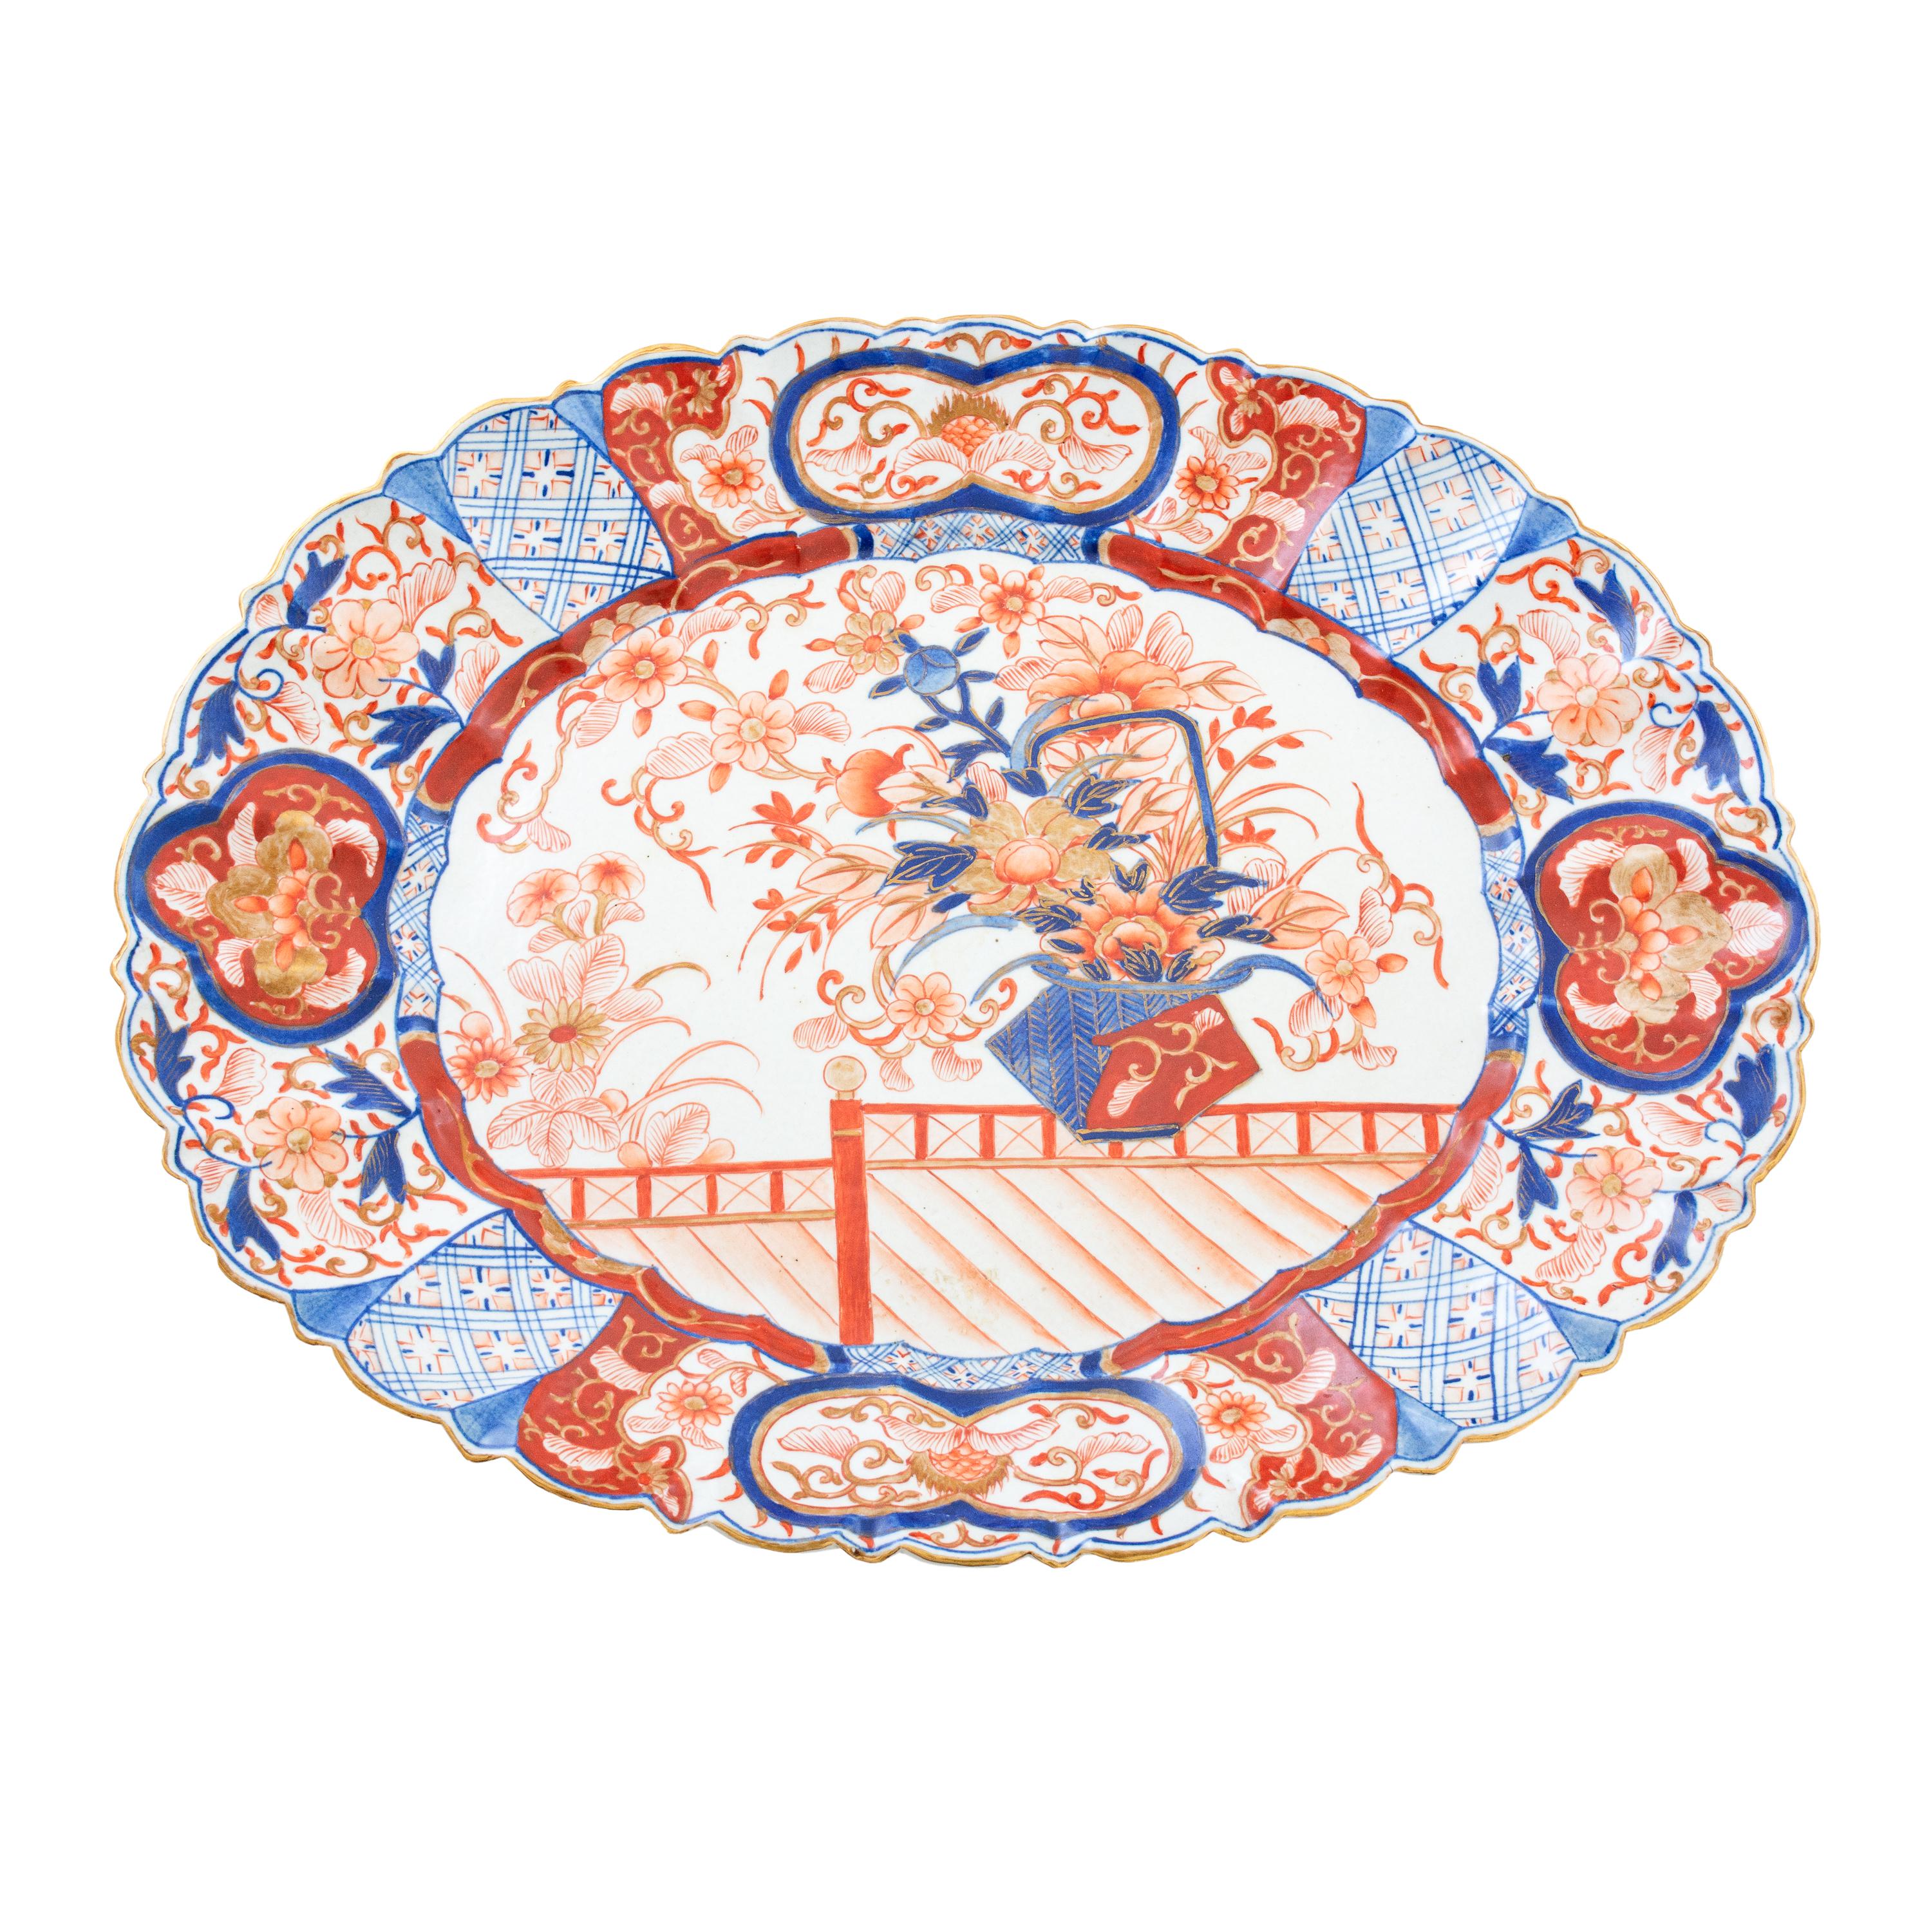 This is an exquisite, and very collectible, pair of oval Japanese Imari platters with scalloped edge and hand-painted in classic Imari colors of cobalt blue and bittersweet, 19th century. Priced individually.